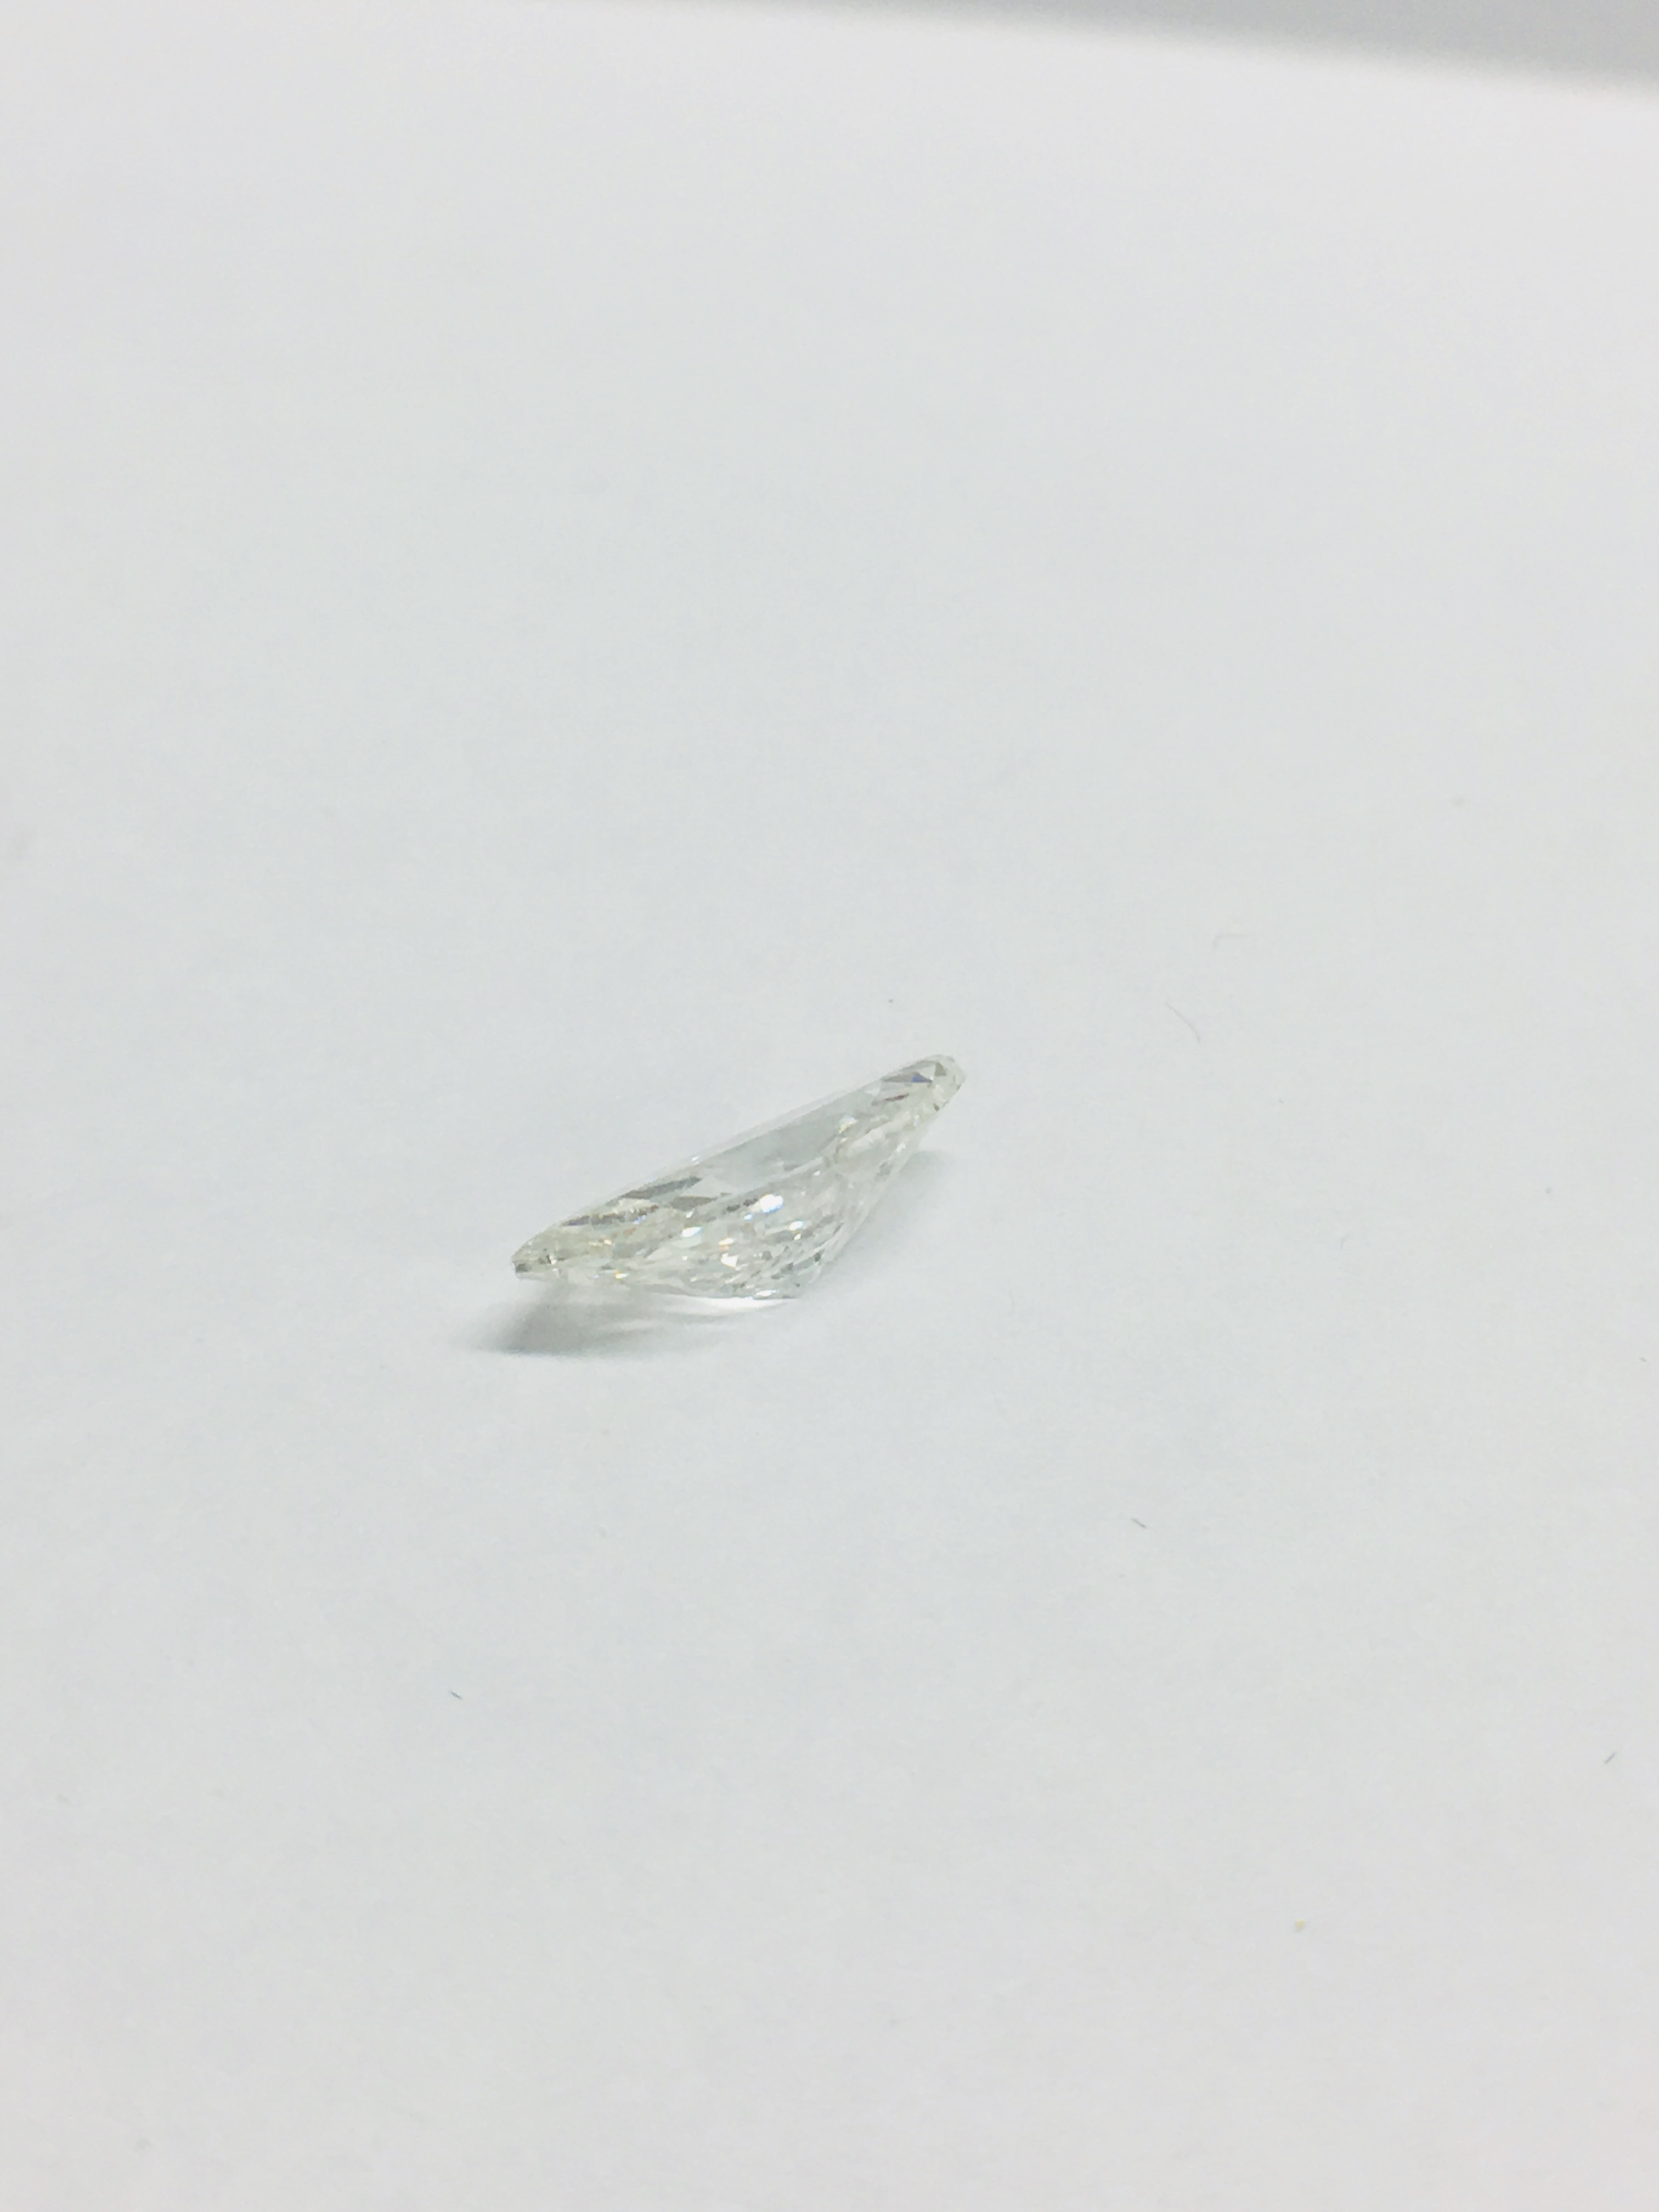 1.23ct Marquis cut Natural Diamond,H colour,si2 clarity - Image 4 of 5